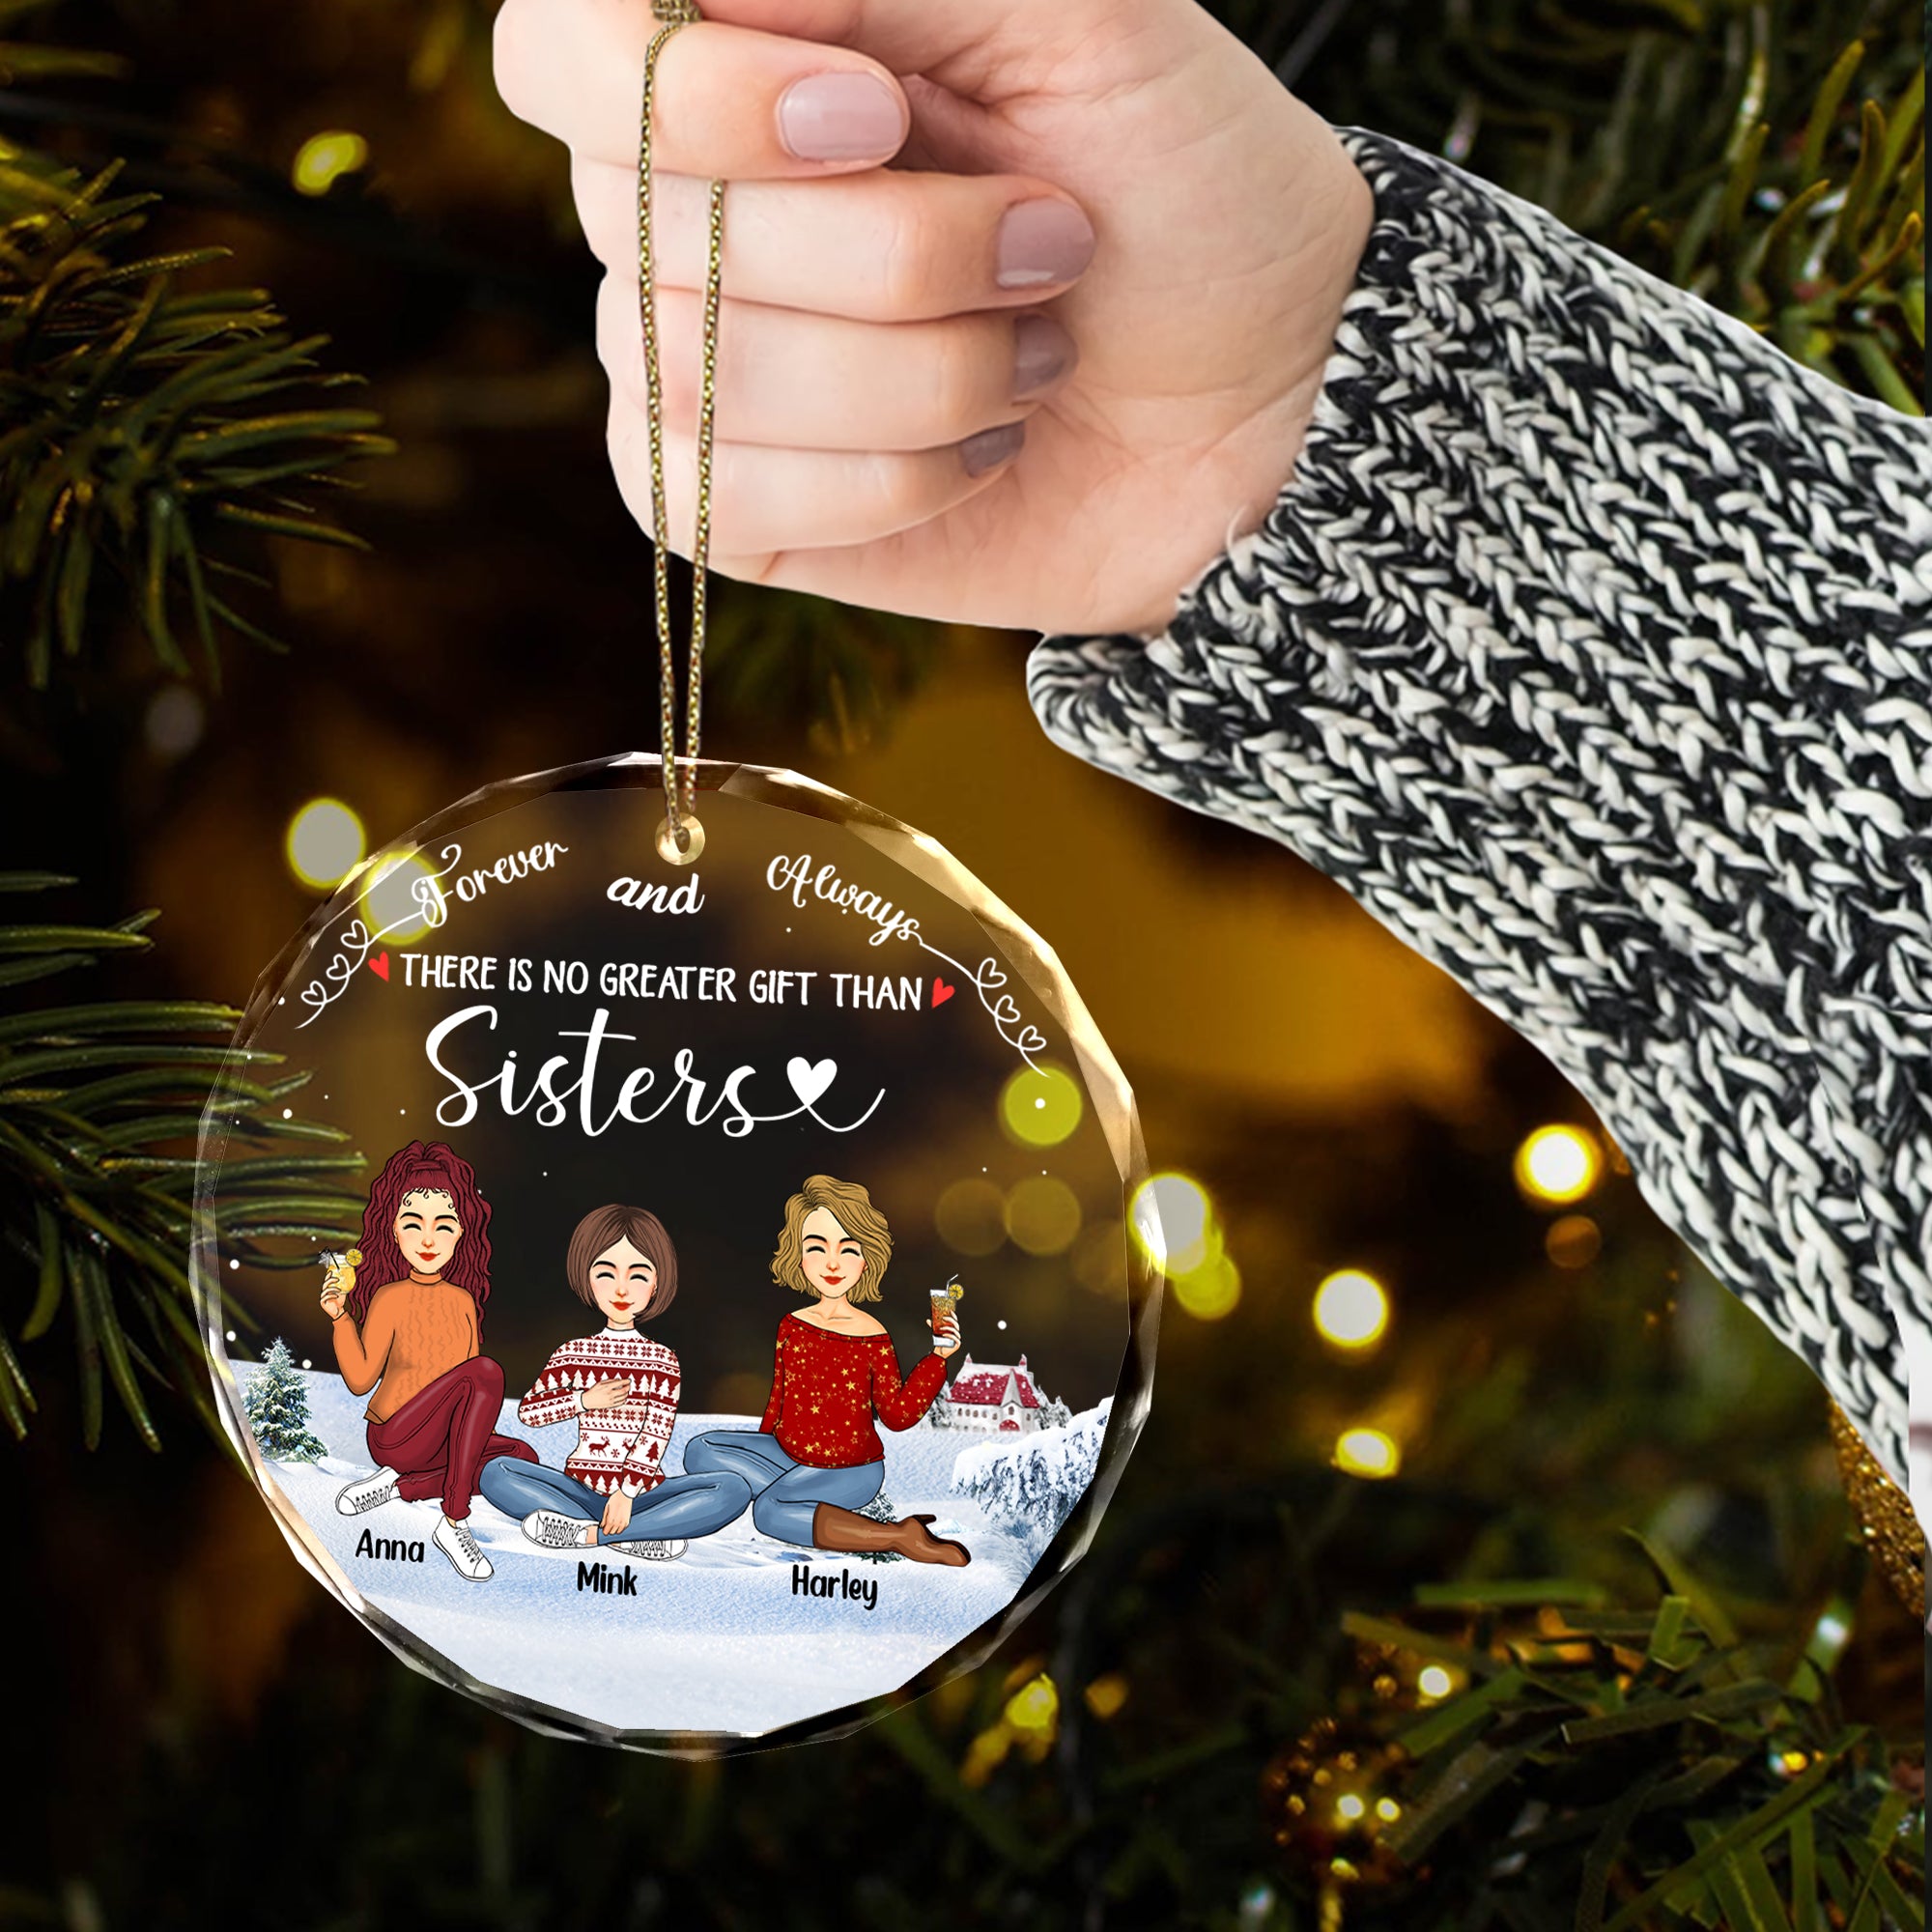 Personalized Christmas Ornament - There Is No Greater Gift Than